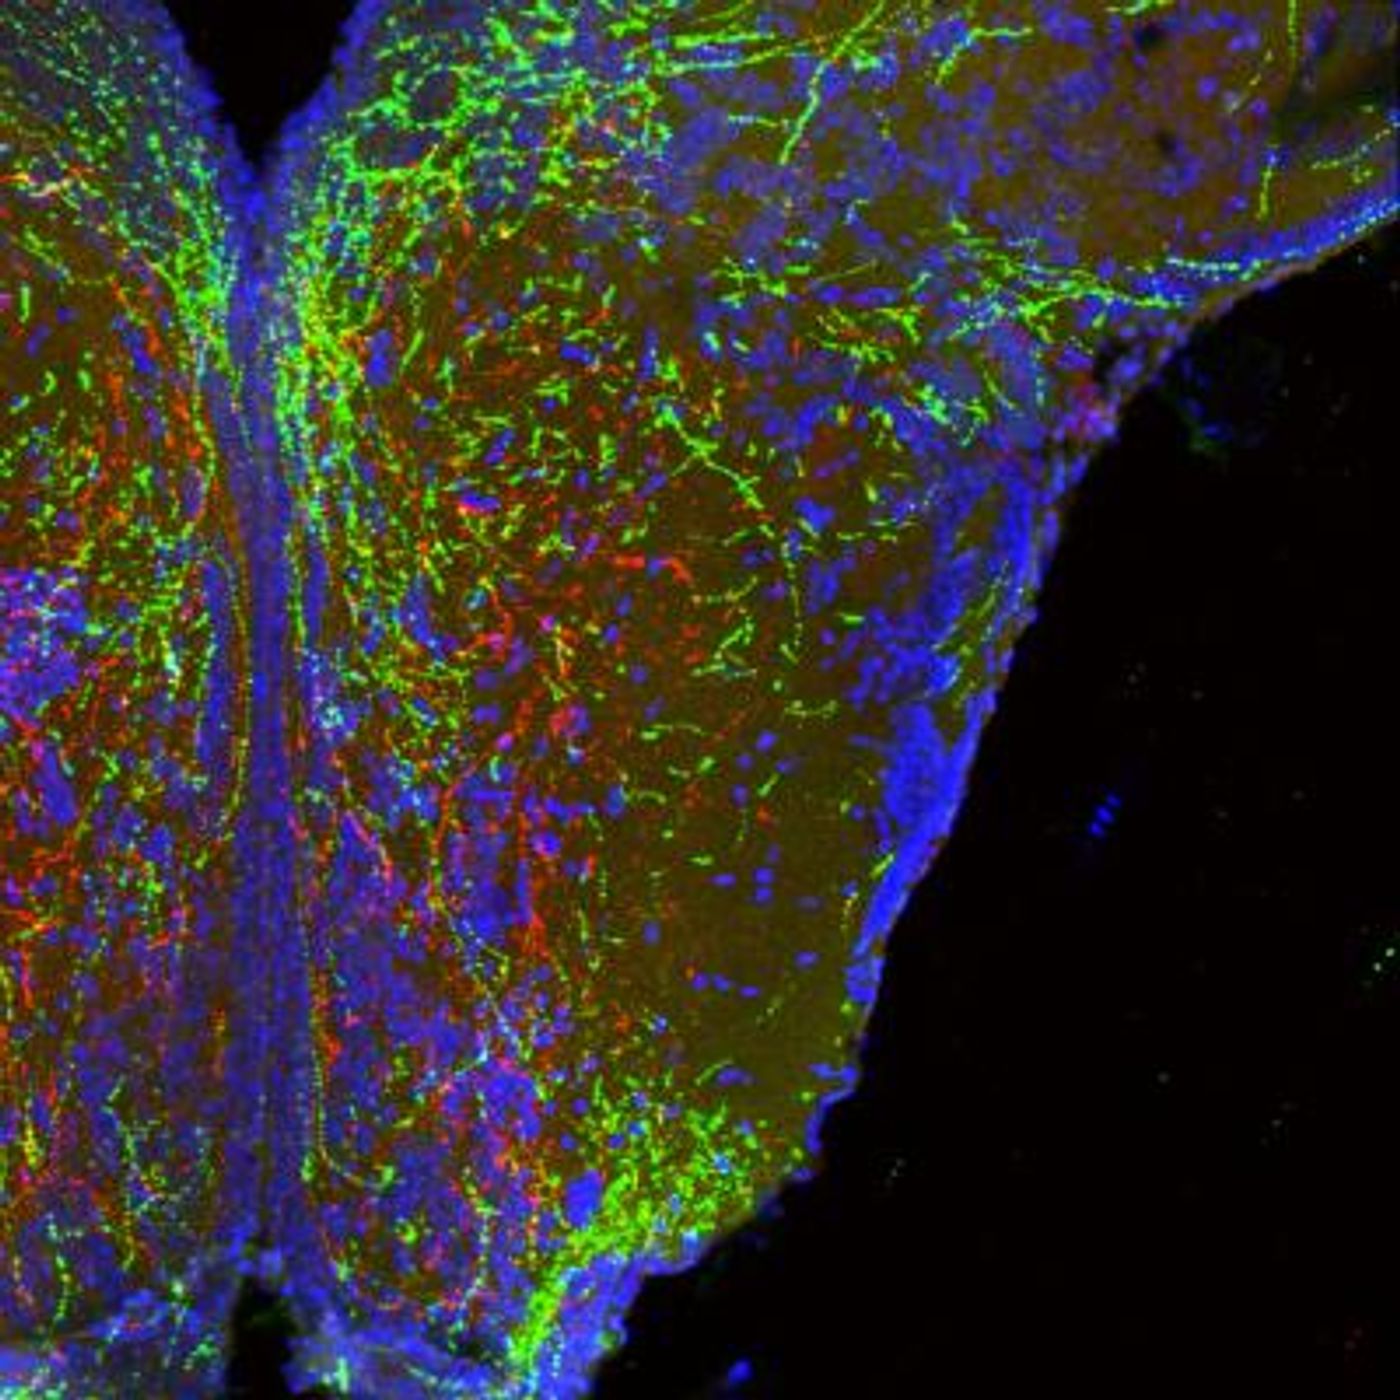 Long, wire-like projections of neurons in the hypothalamus that form body weight circuits appear red and green. Cell bodies from one area of the hypothalamus (bottom of image) branch up to another. Note that these cells specifically avoid some areas (appearing dark in the image) to seek proper targets. / Credit: Dr. Sebastien Bouret, CHLA